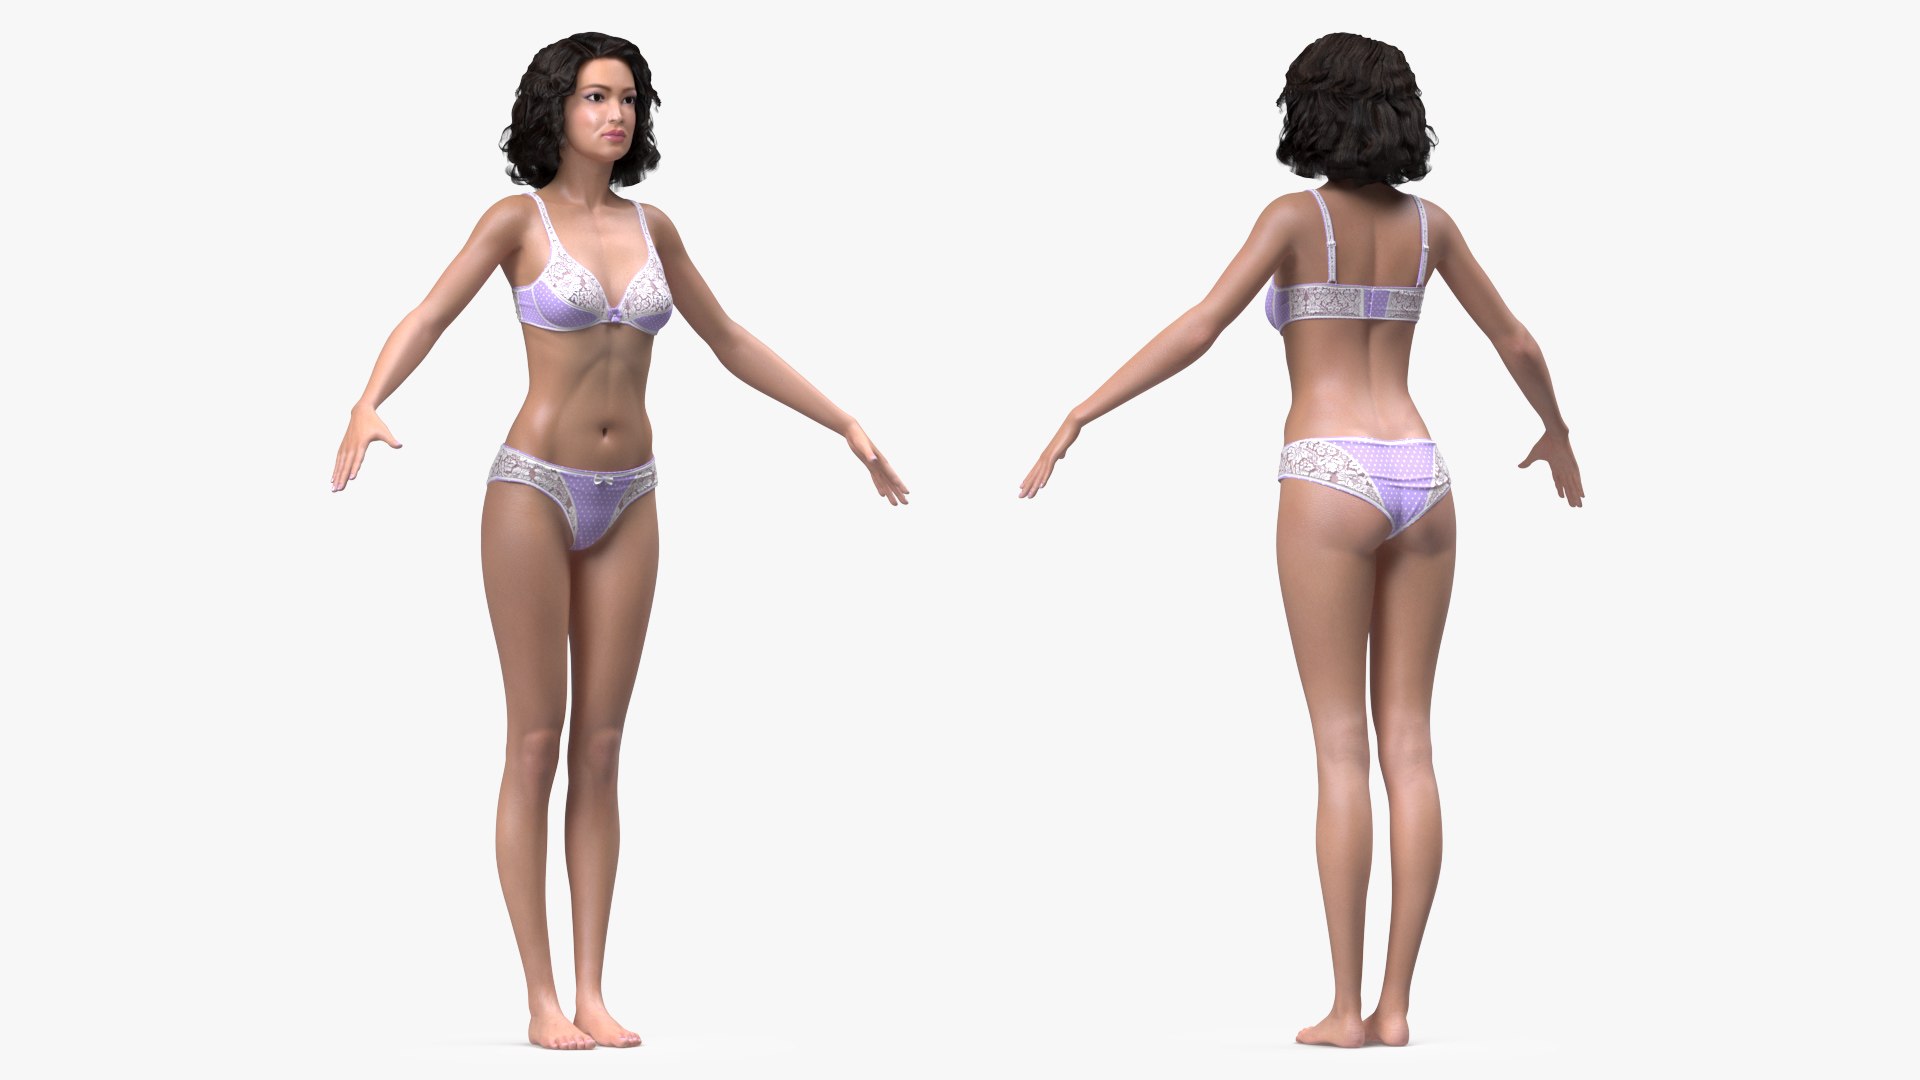 Asian Woman In Lingerie Rigged 3D Model - TurboSquid 1781682